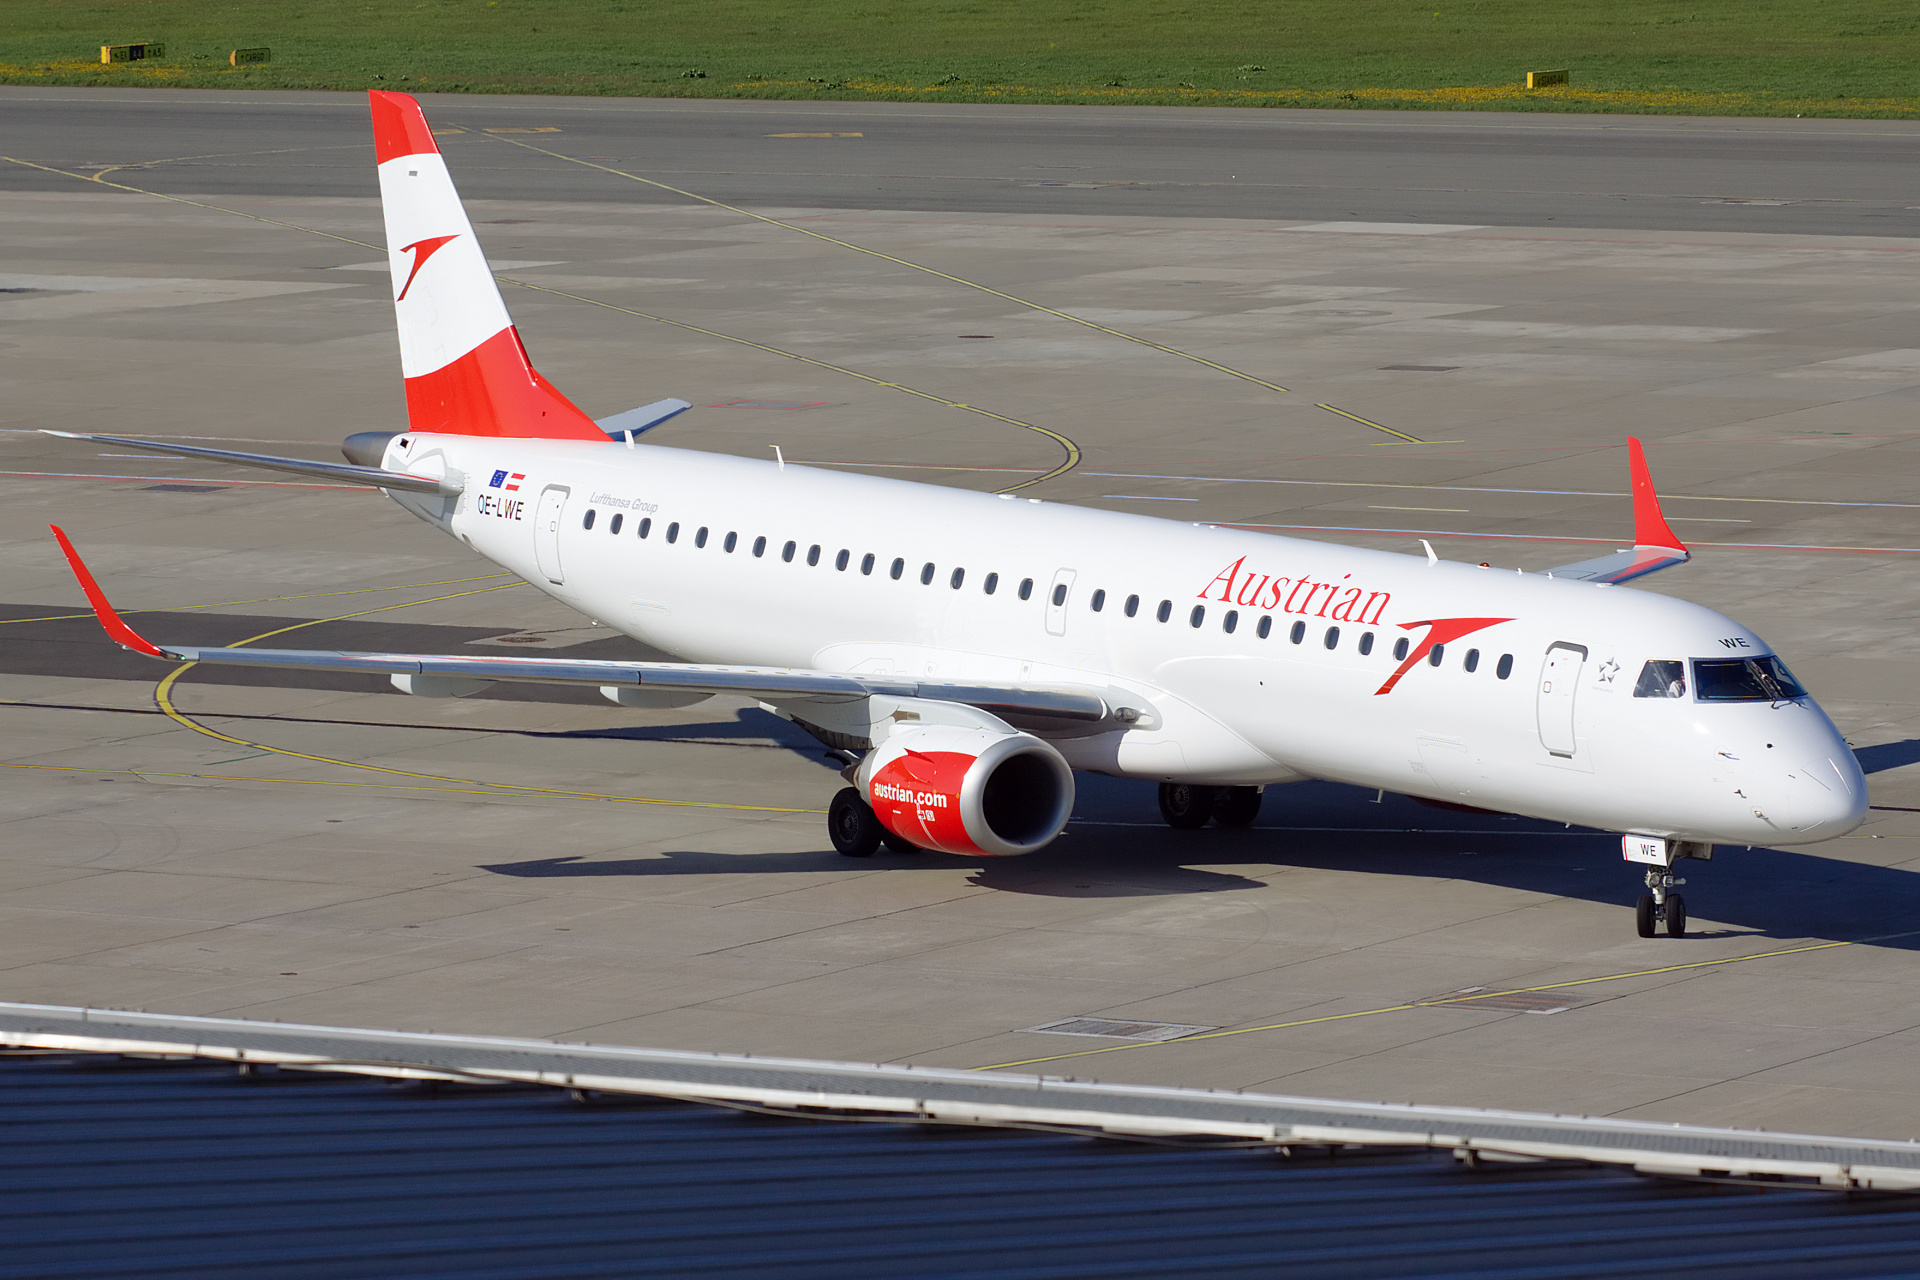 OE-LWE, Austrian Airlines (Aircraft » EPWA Spotting » Embraer E195 » Austrian Airlines)